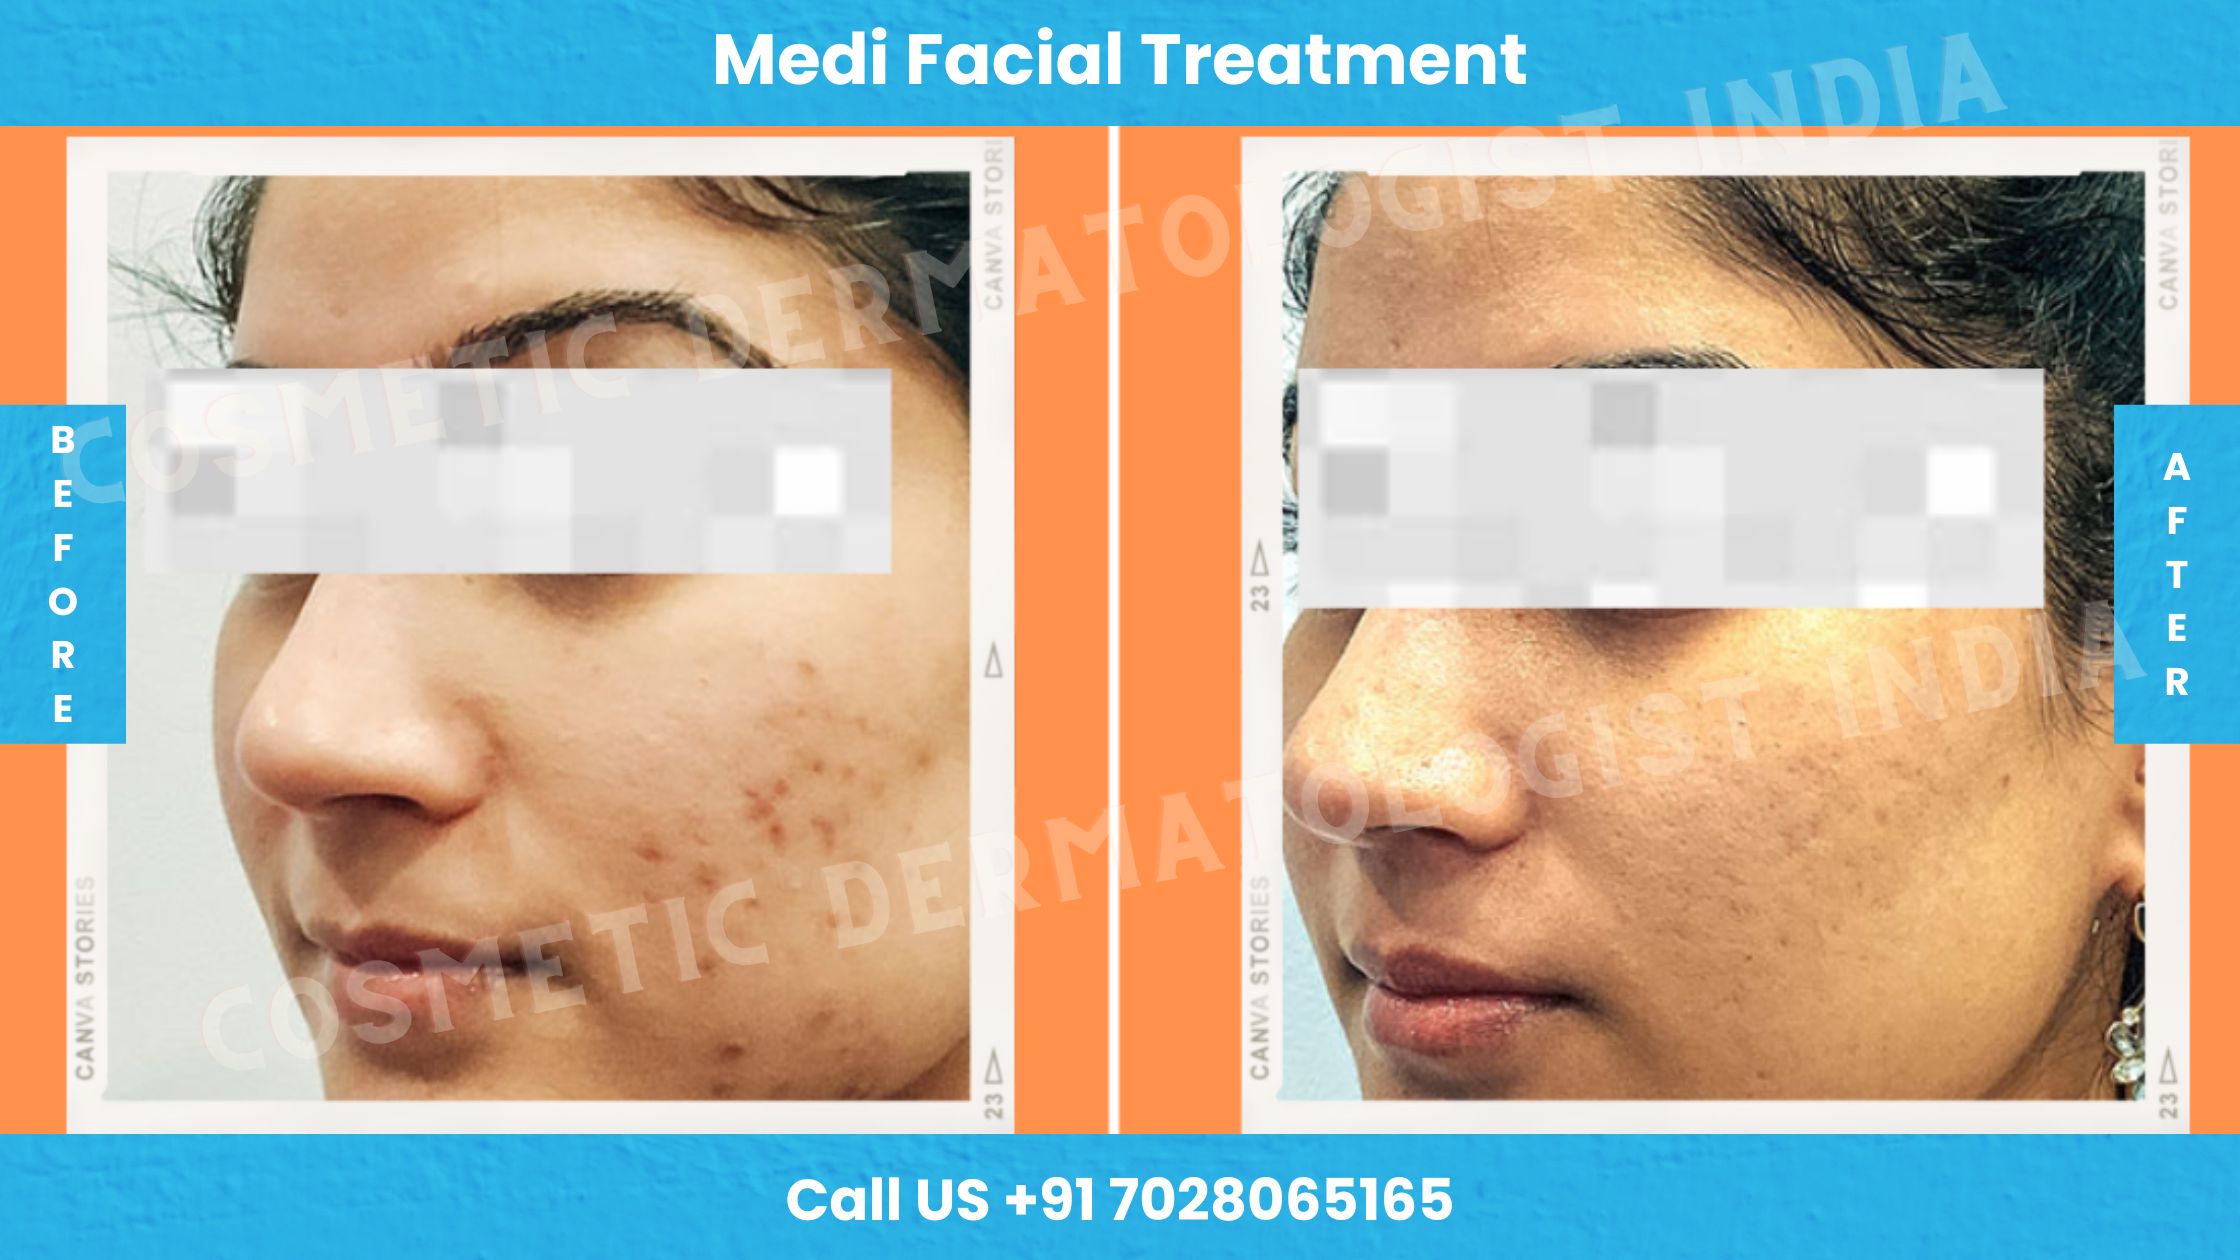 Before and After Images of Medi-Facial Treatment